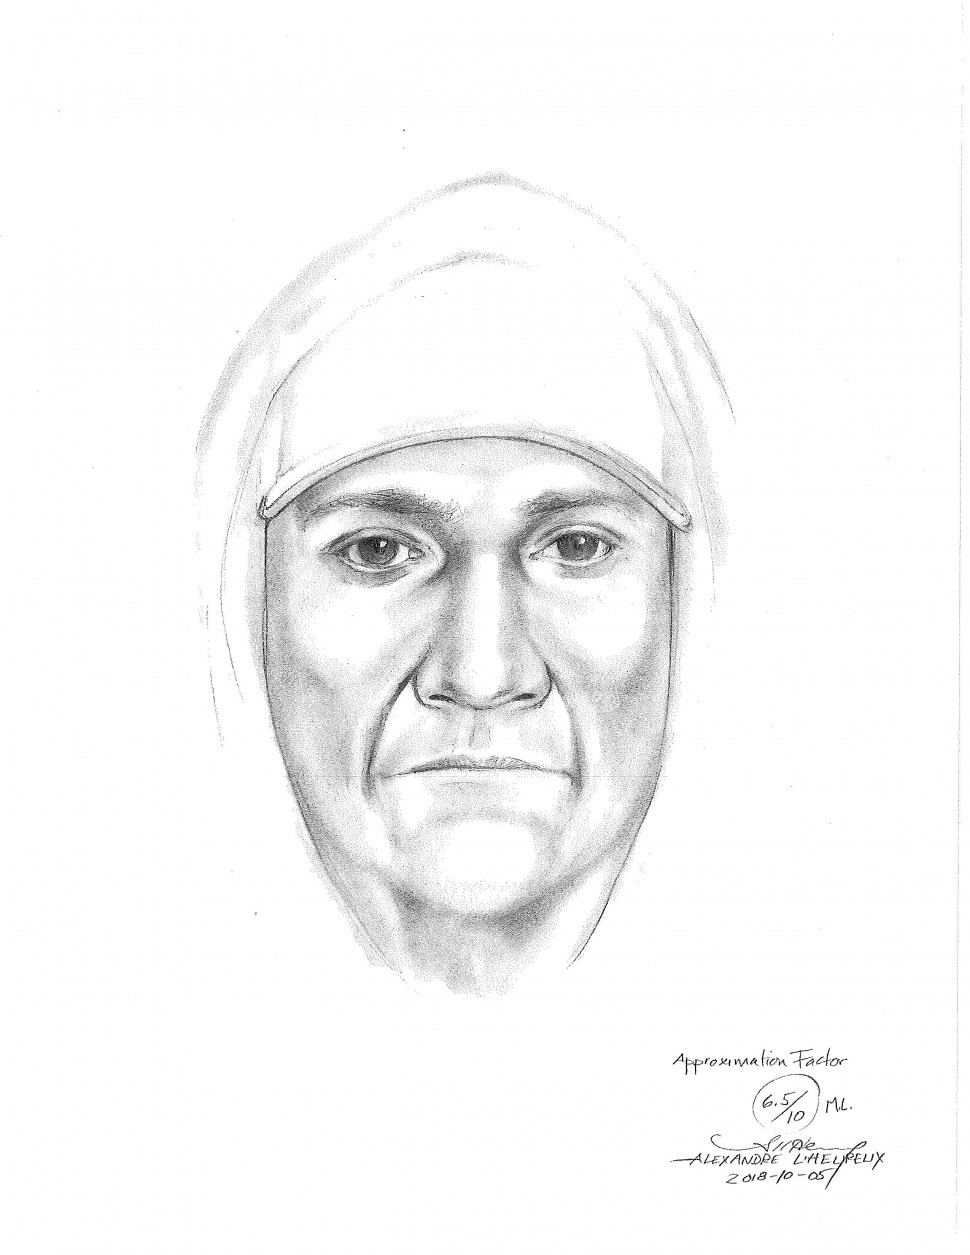 The Southeast District RCMP is releasing a sketch of a second suspect being sought in relation to a home invasion and assault that occurred in Fords Mills, N.B., in September.